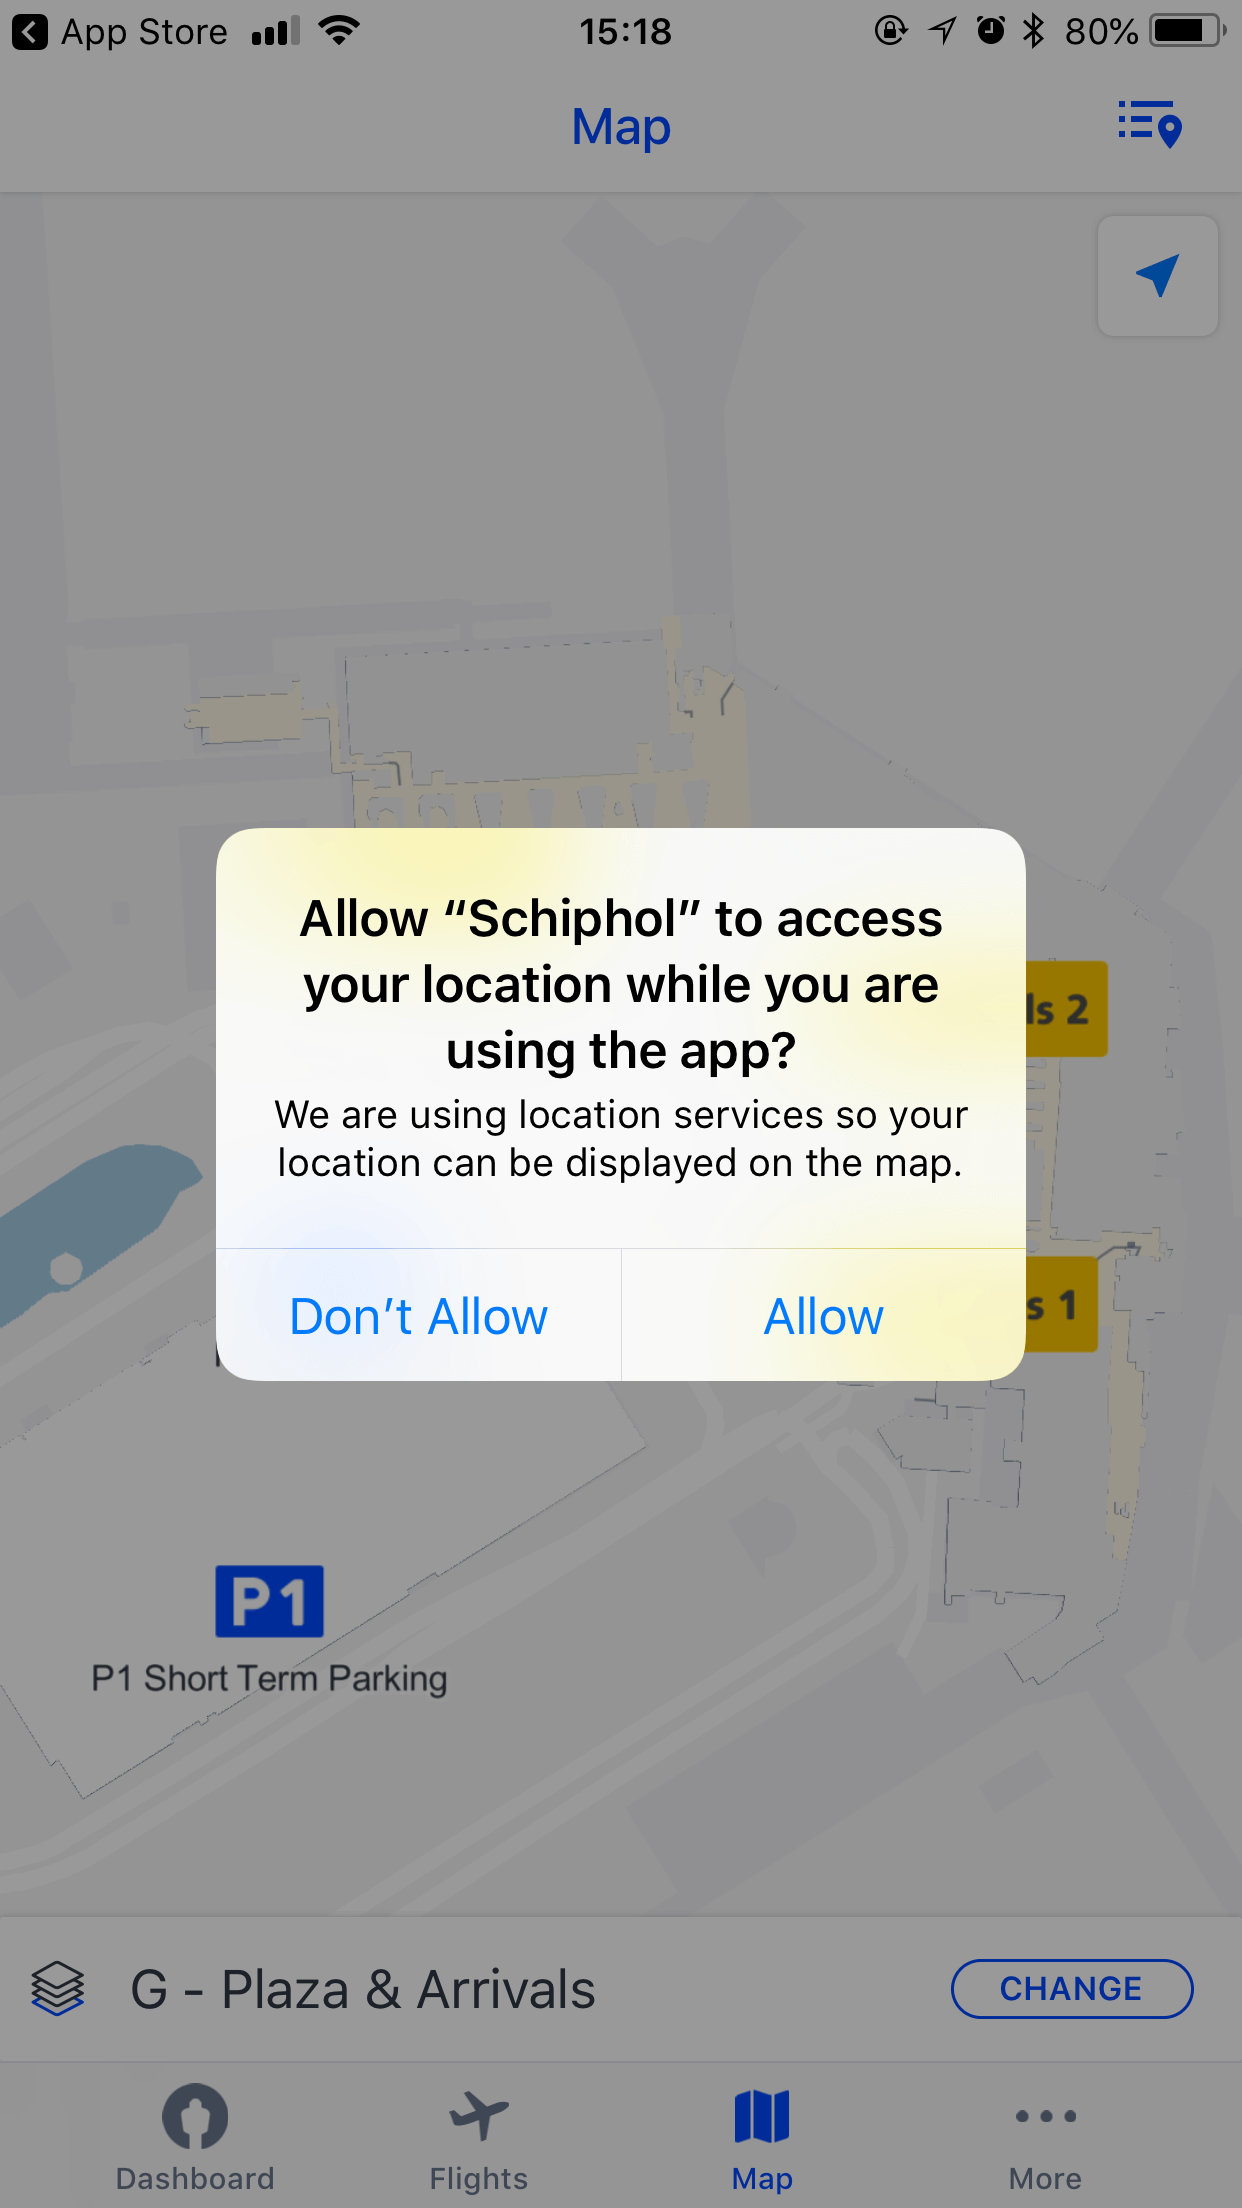 Schiphol Mobile App Location Tracking Permission